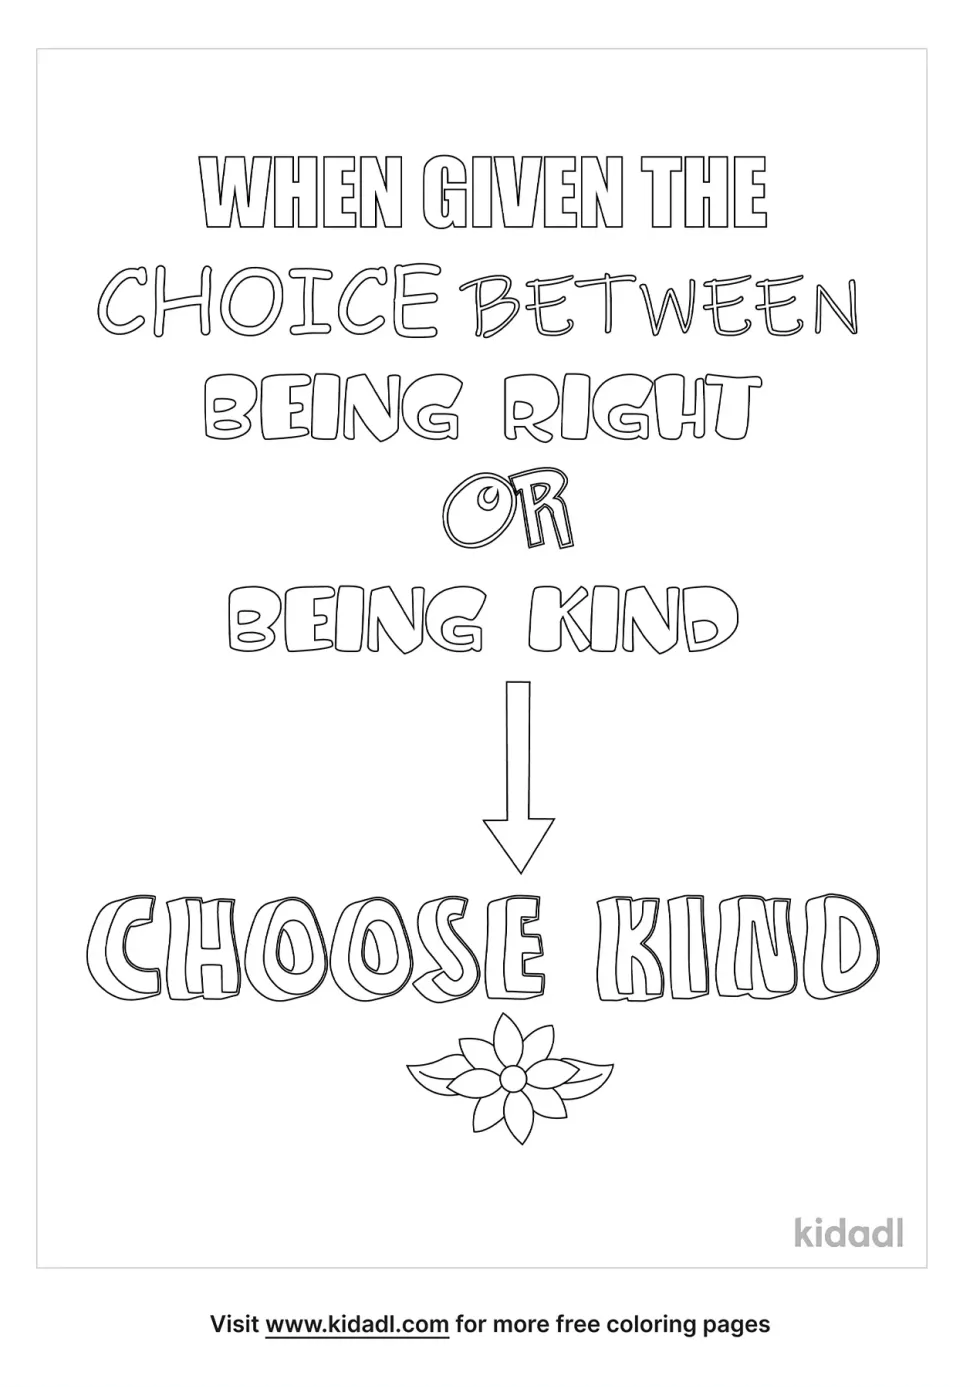 Choose Being Kind Over Being Right Quote